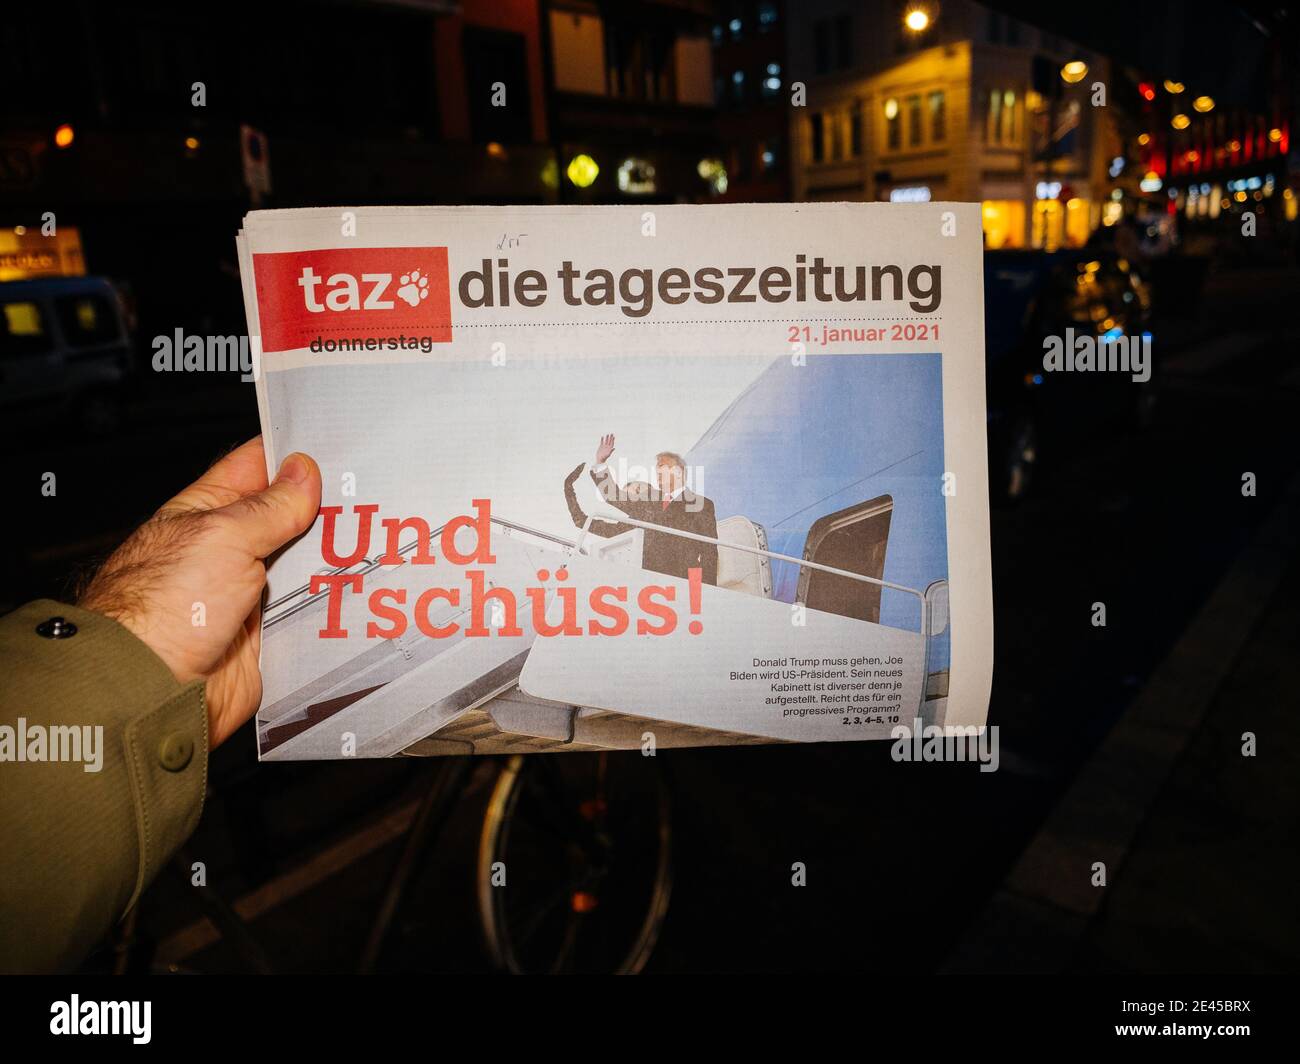 Paris, France - Jan 21, 2021: POV man buying Taz die tageszeitung German newspaper headline words Und Tschuss translated as good bye featuring Donald and Melania Trump leaving the presidency Stock Photo